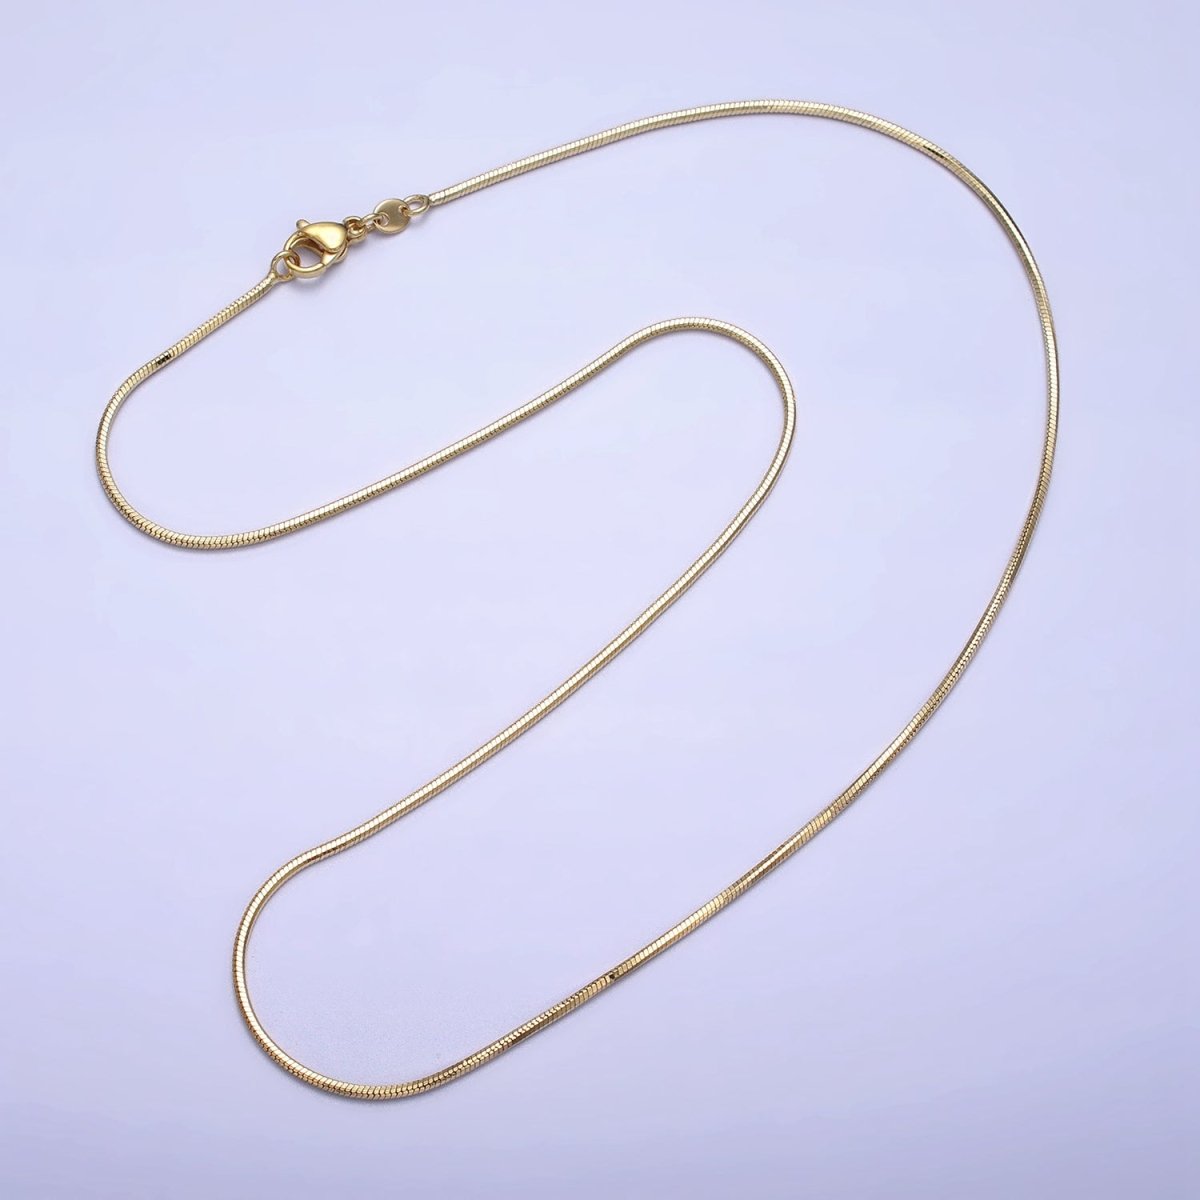 Gold Snake Chain Necklace - Gold Filled Herringbone Necklace, Thin Herringbone Chain 18 inch Necklace | WA-1639 Clearance Pricing - DLUXCA